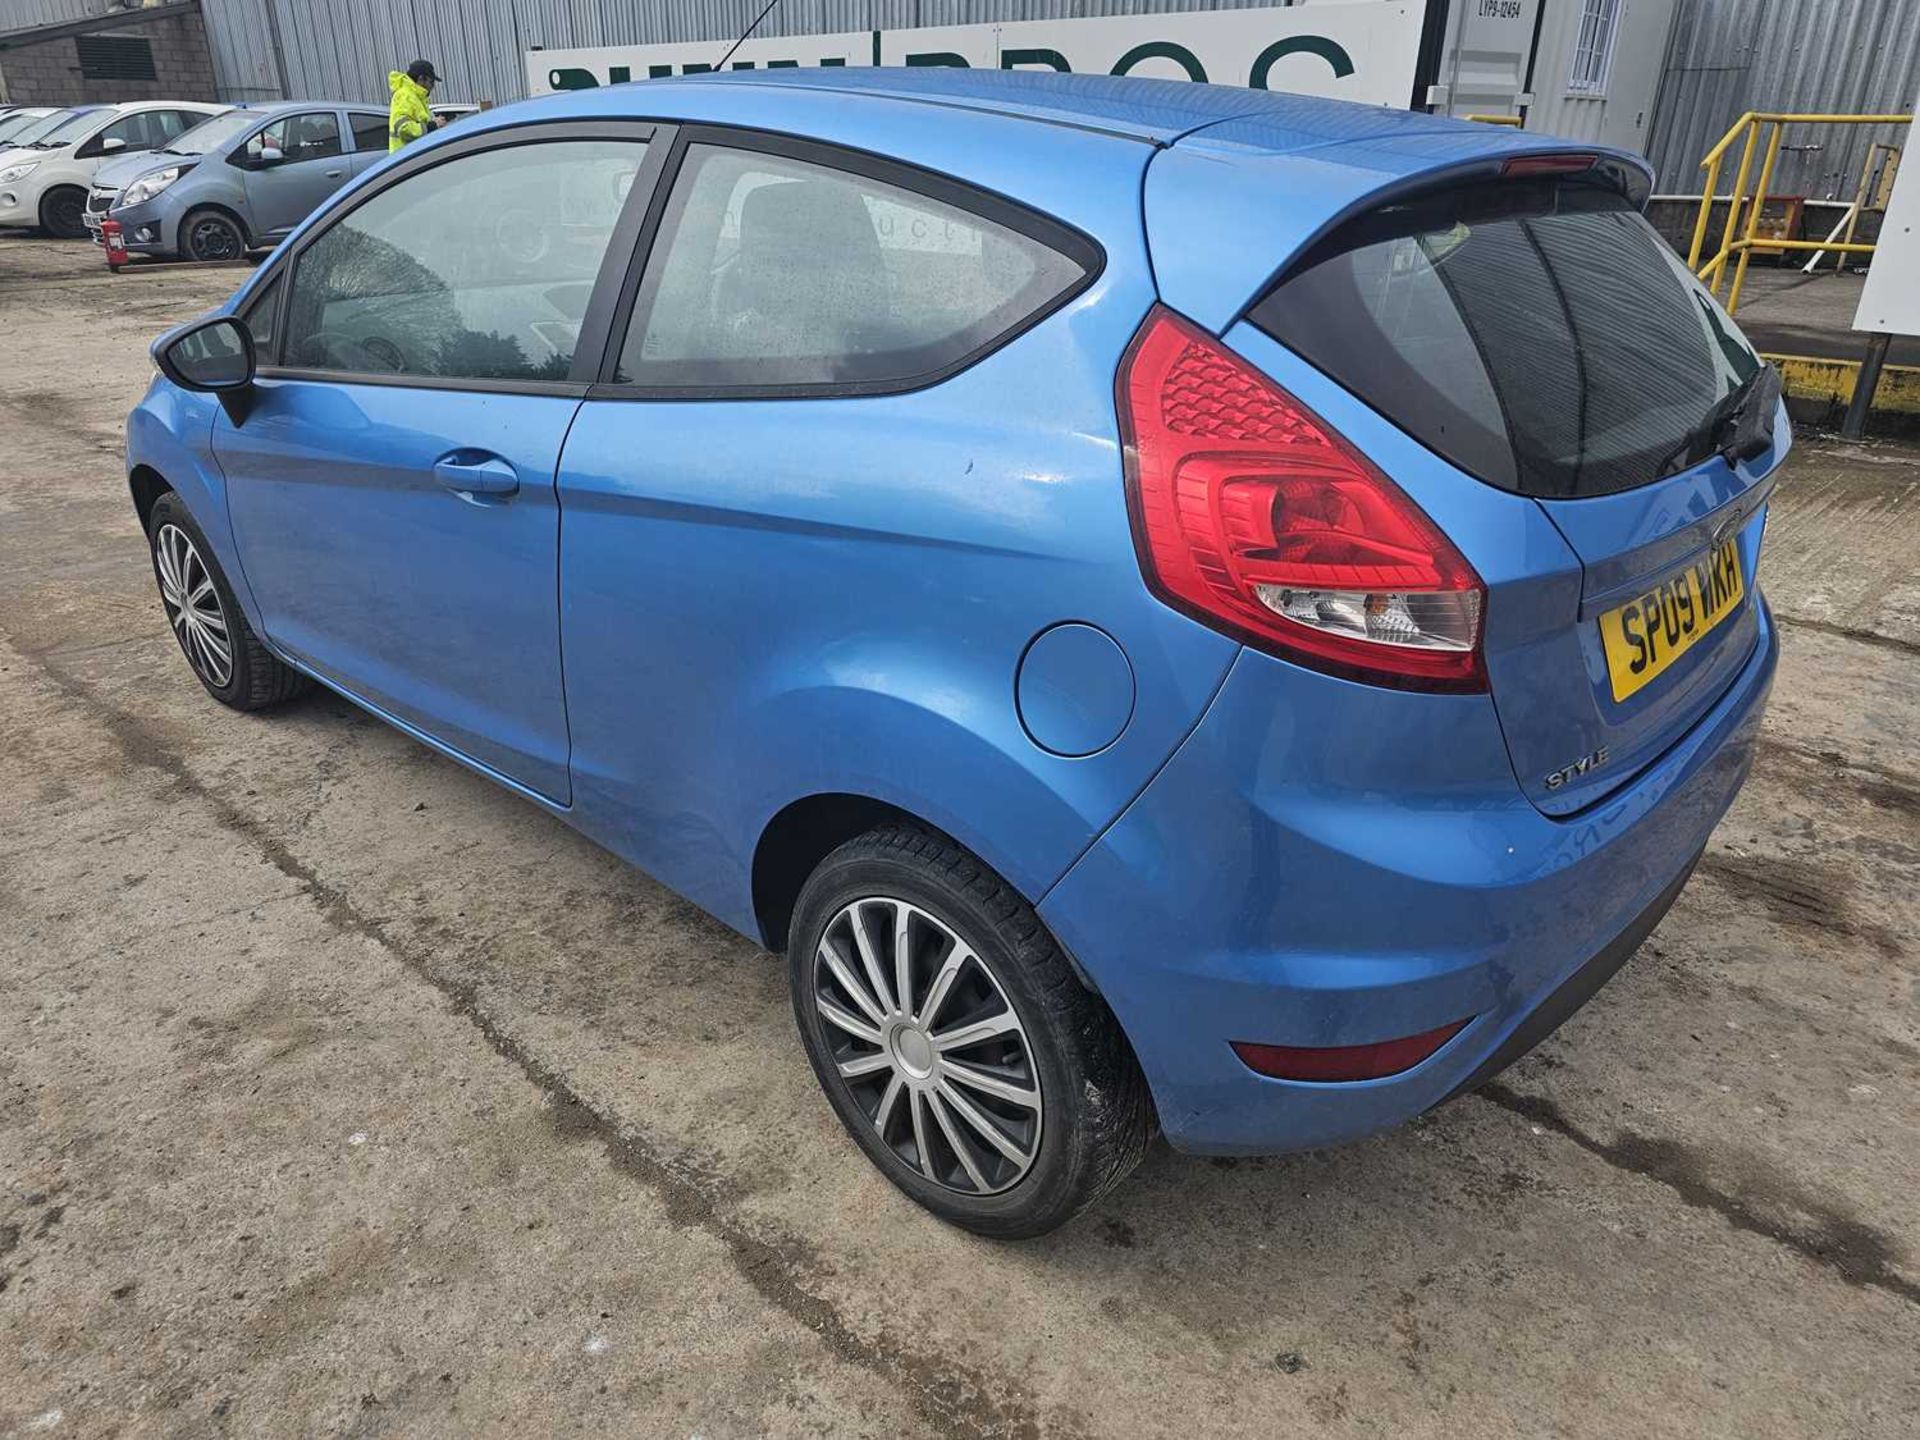 2009 Ford Fiesta Style 82, 5 Speed (Reg. Docs. Available) - Image 3 of 25